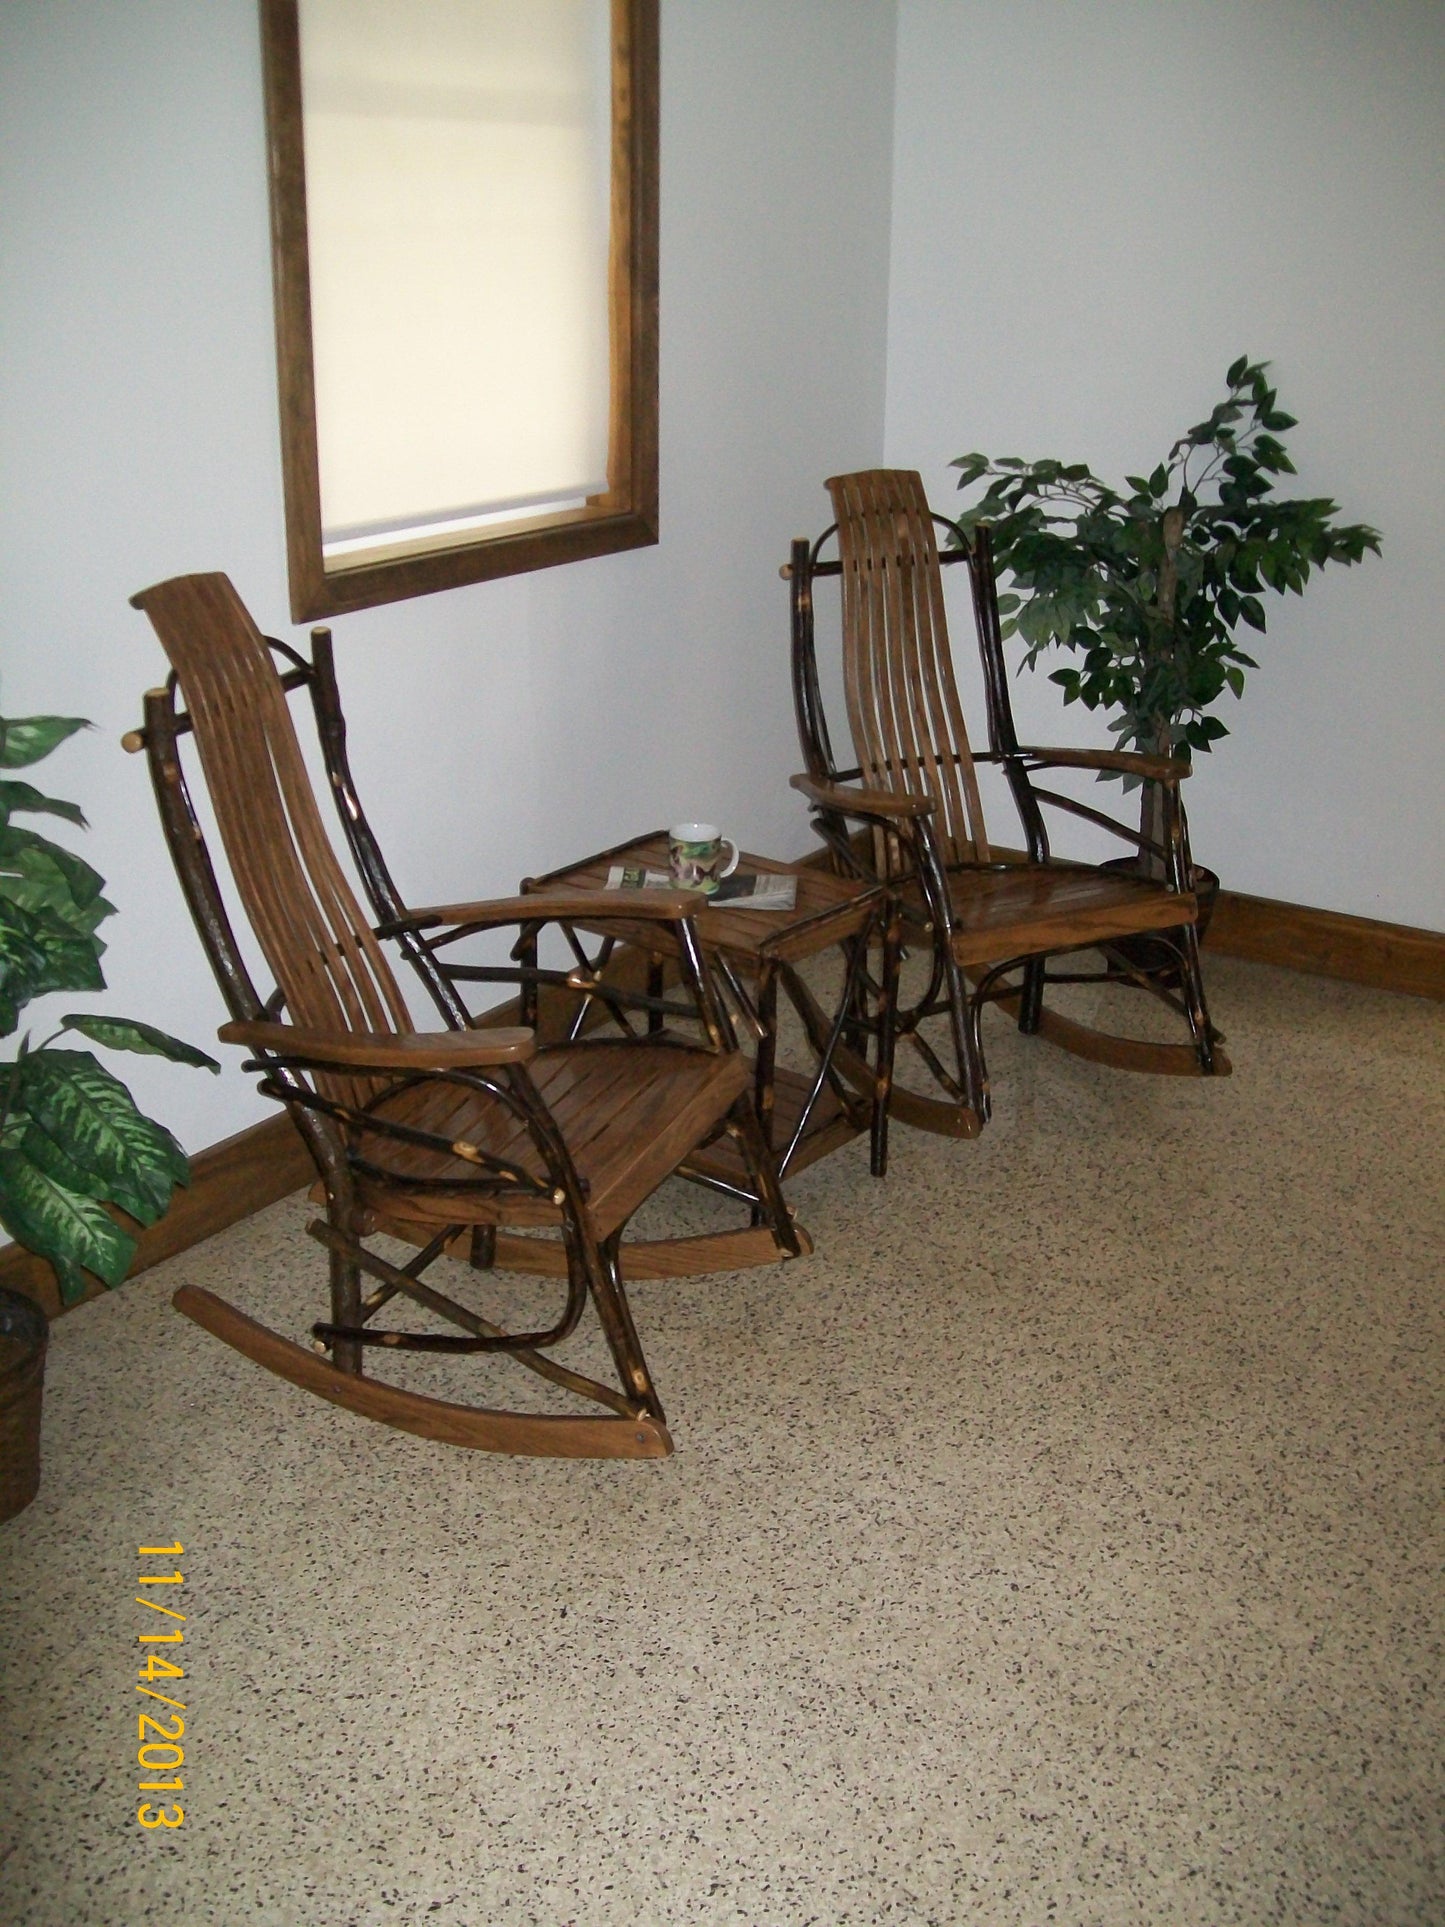 a&l amish bentwood hickory rocker with hickory end table walnut finish set